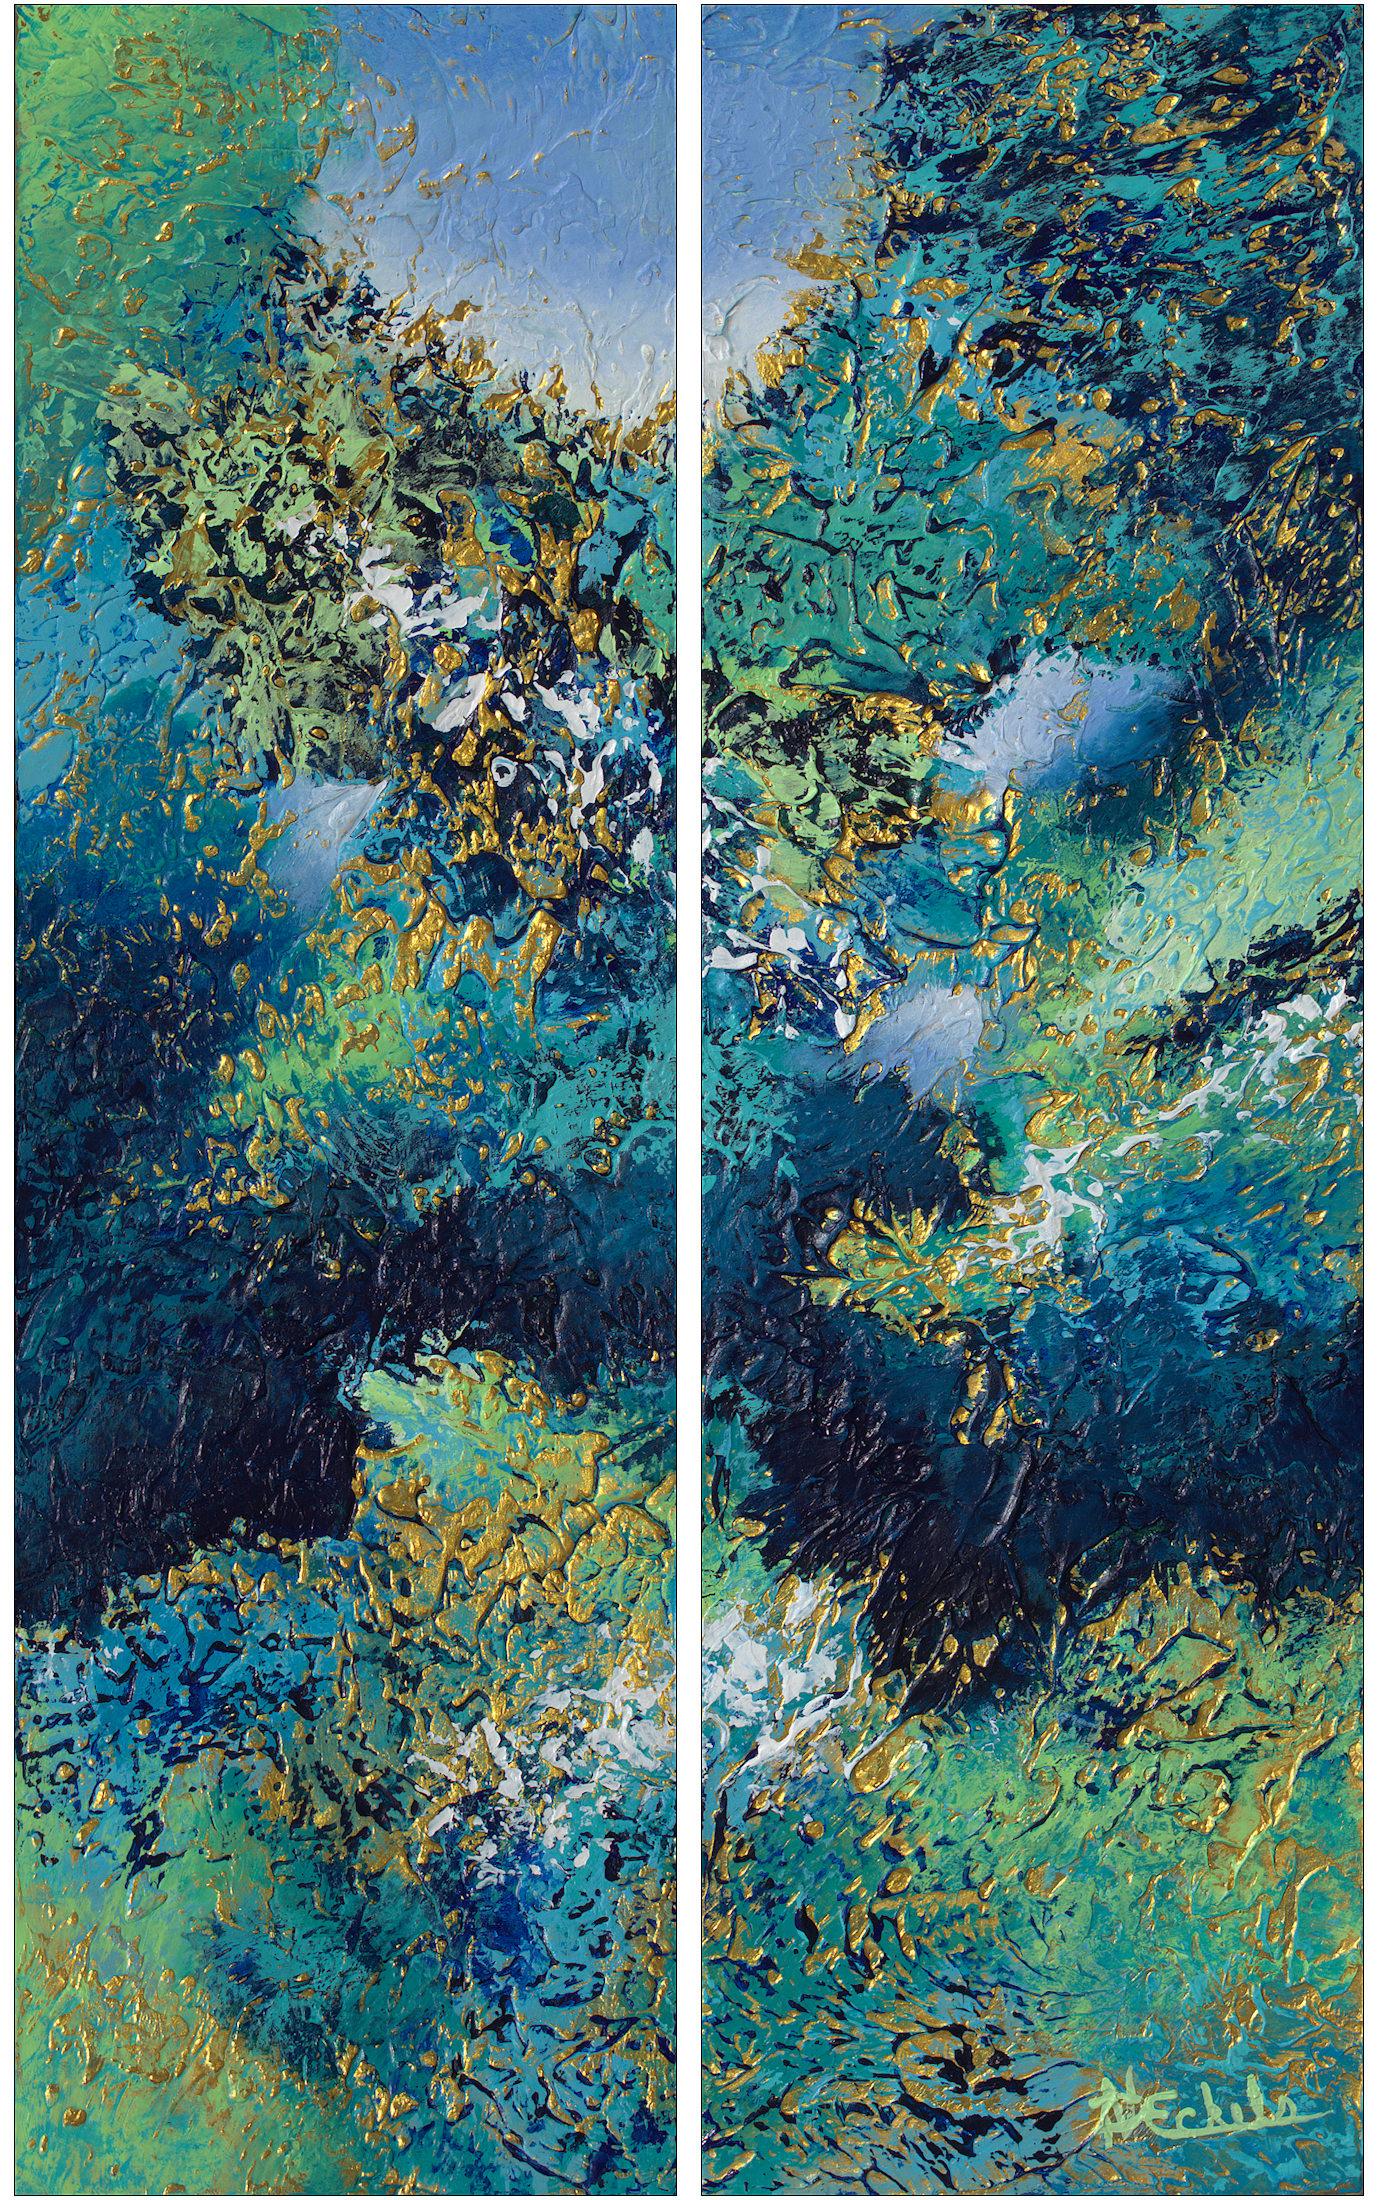 "Watery Layers"  Mixed Media abstract with textural greens, blues, gold metallic - Mixed Media Art by Nancy Eckels